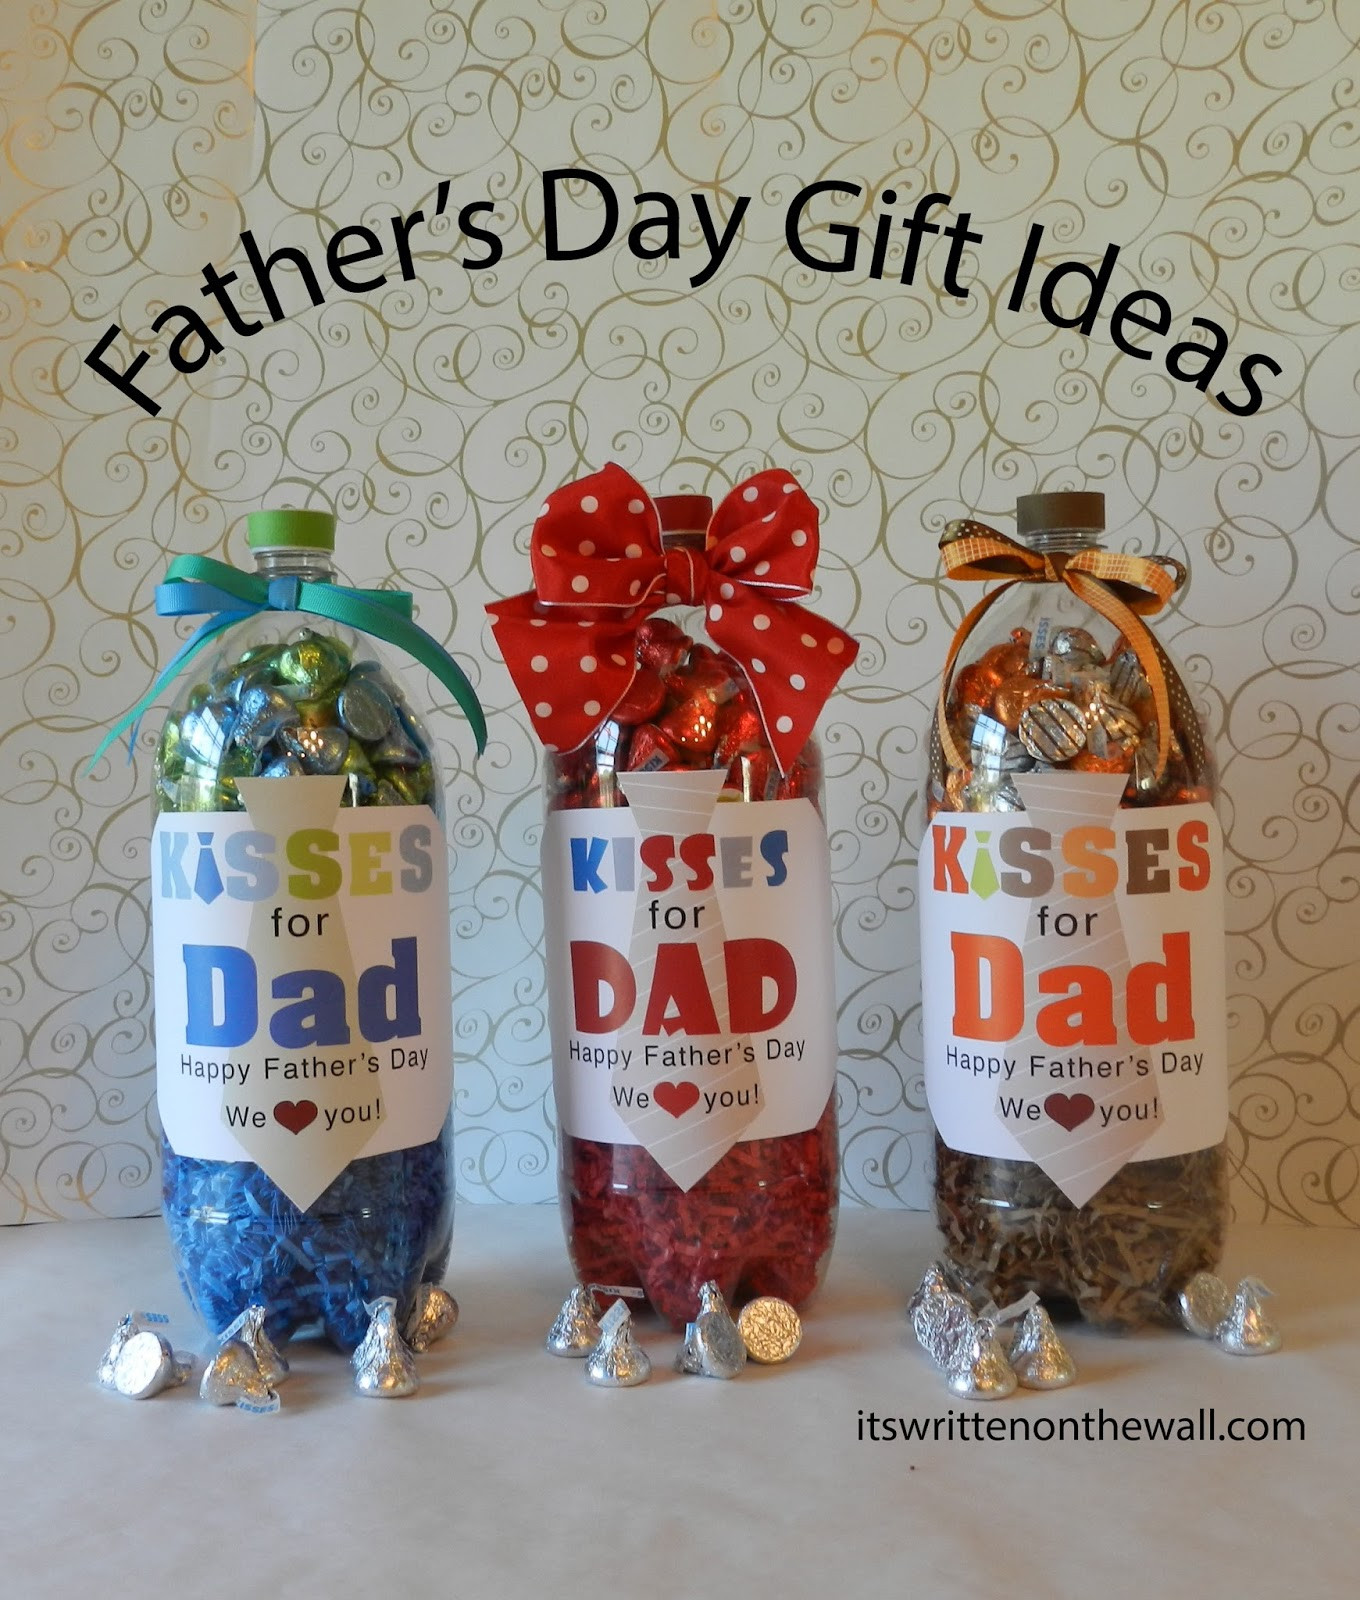 Fathers Day Present Ideas
 It s Written on the Wall Fathers Day Gift Ideas For the